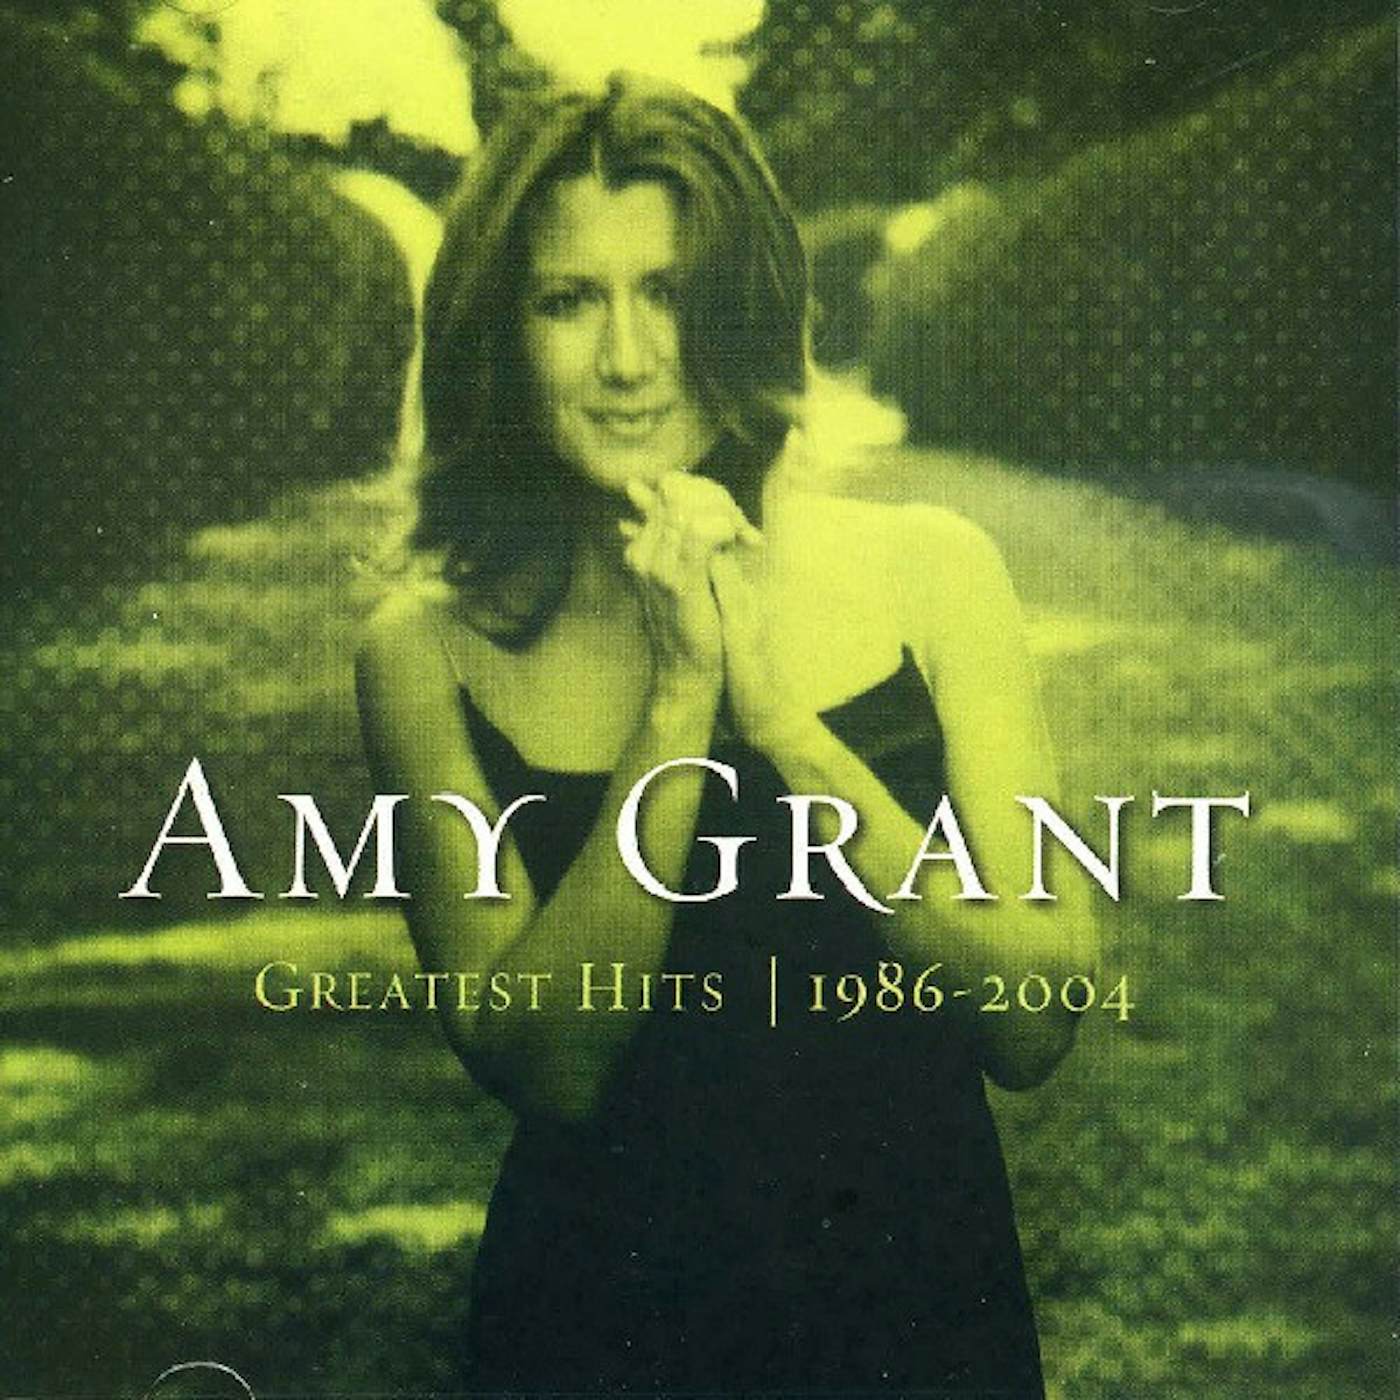 Amy Grant GREATEST HITS CD